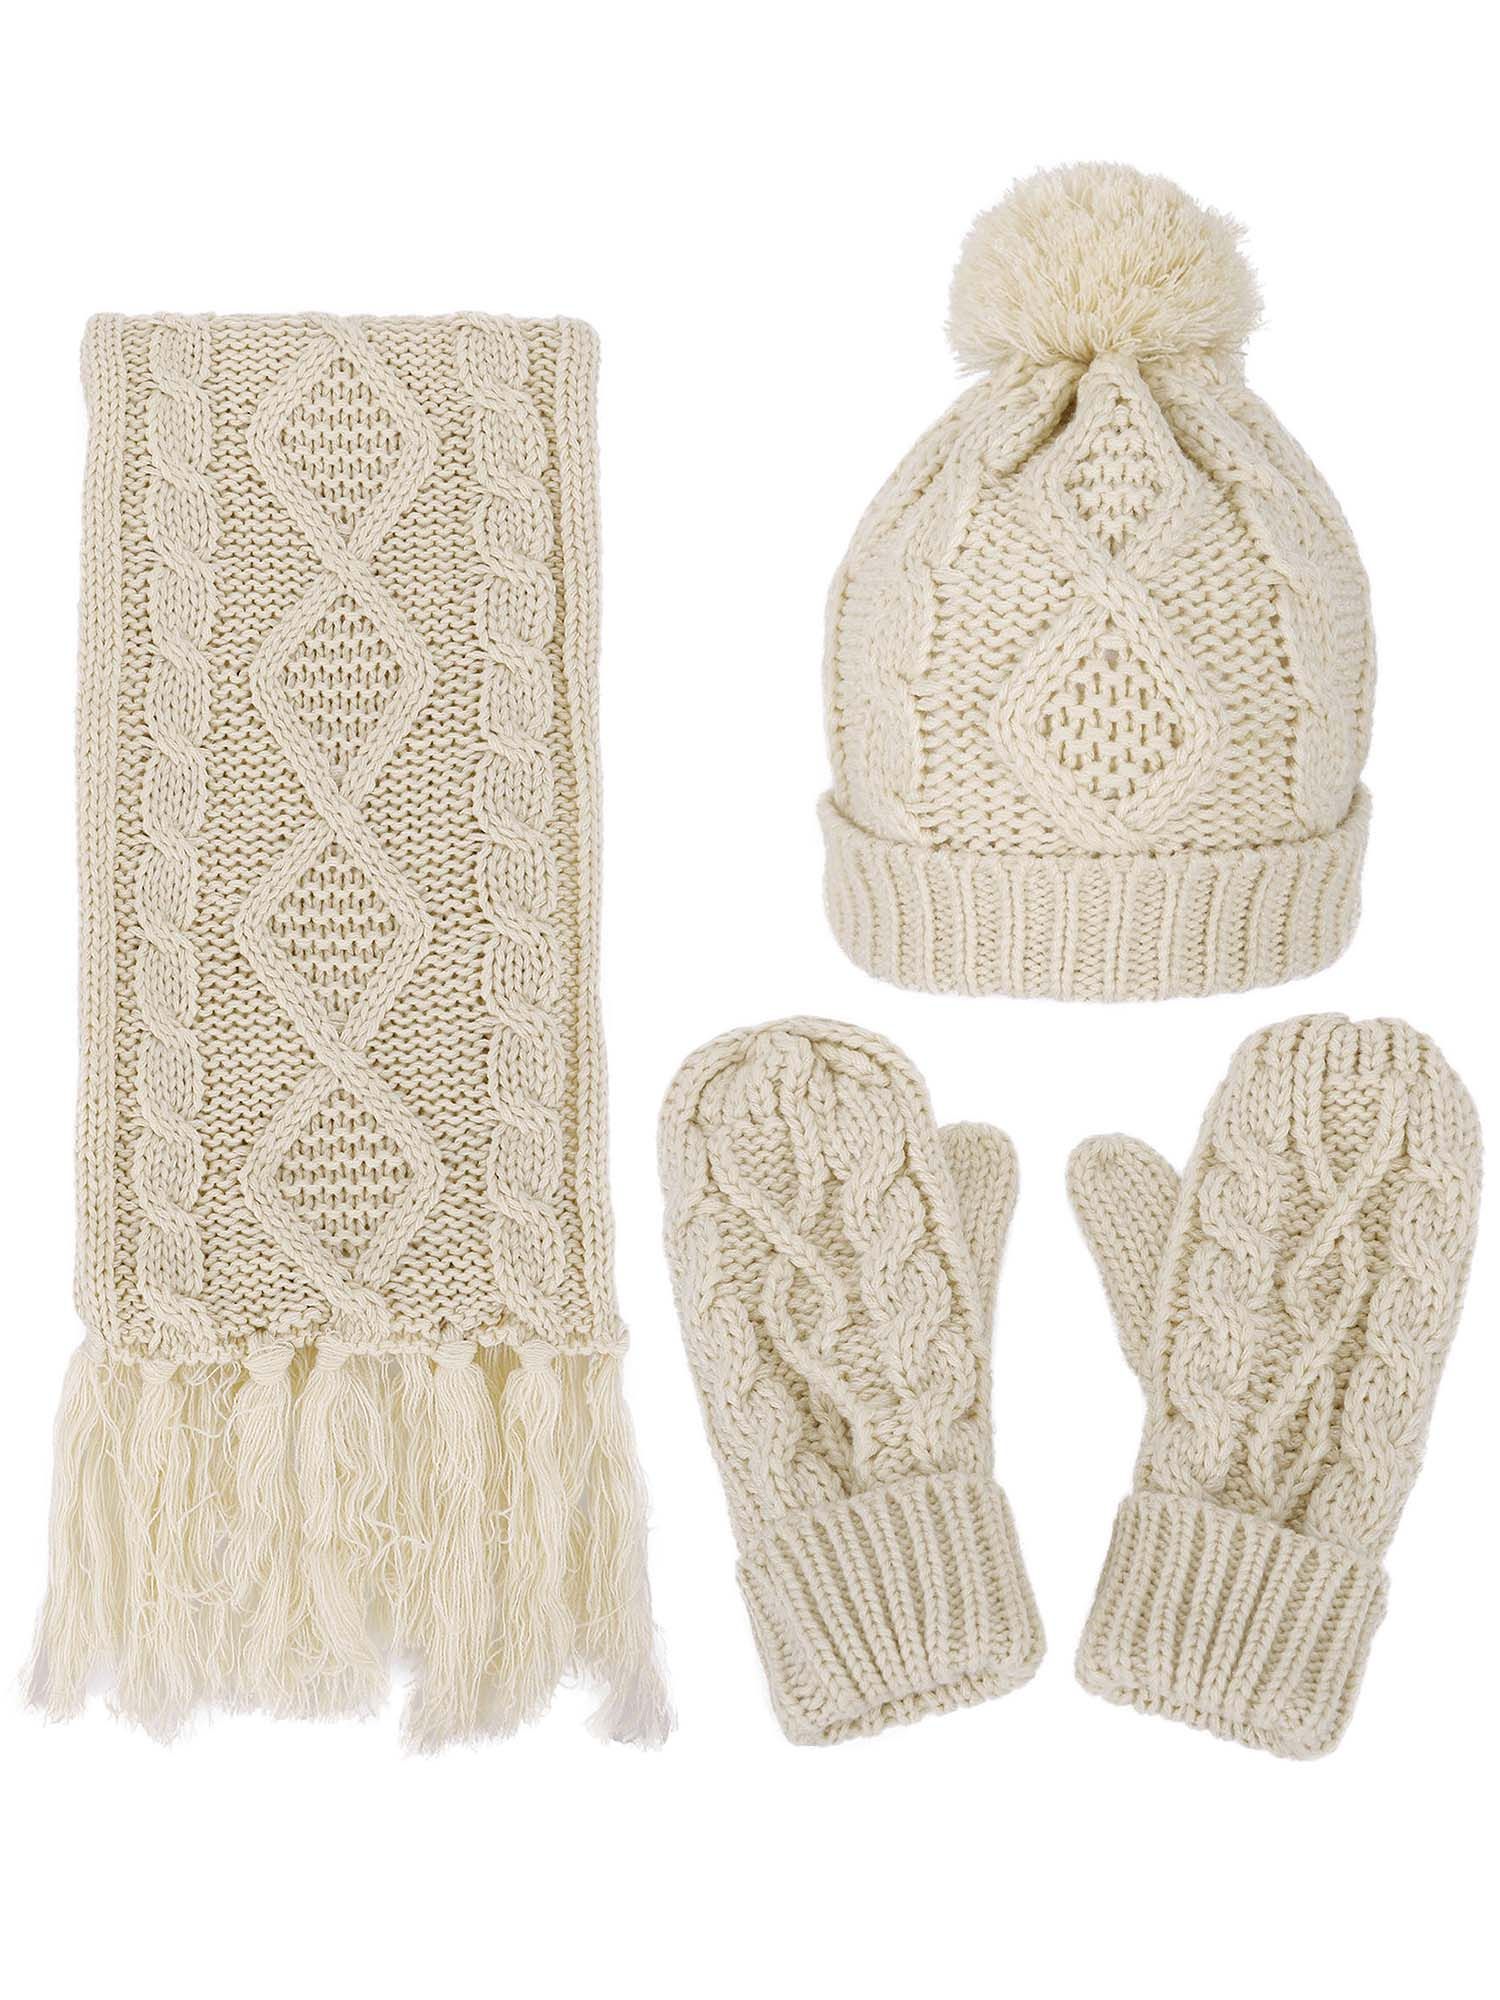 3 in 1 Warm Thick Cable Knitted Hat Scarf & Gloves Winter Set, Grey | Walmart (US)